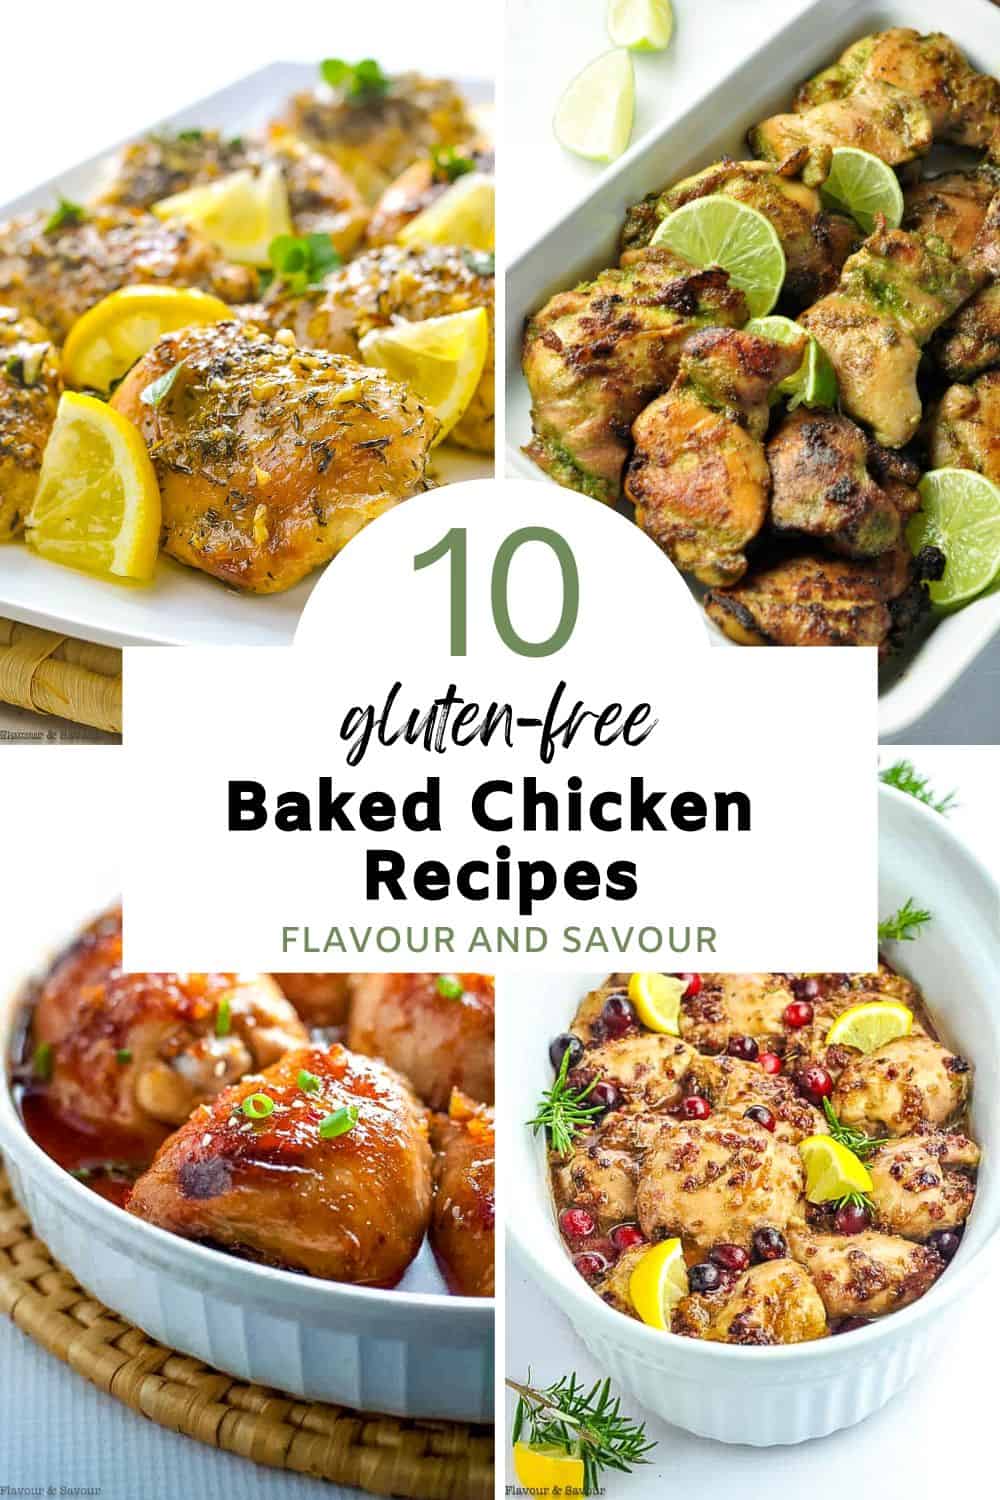 A collage of images of gluten-free baked chicken recipes with text overlay.